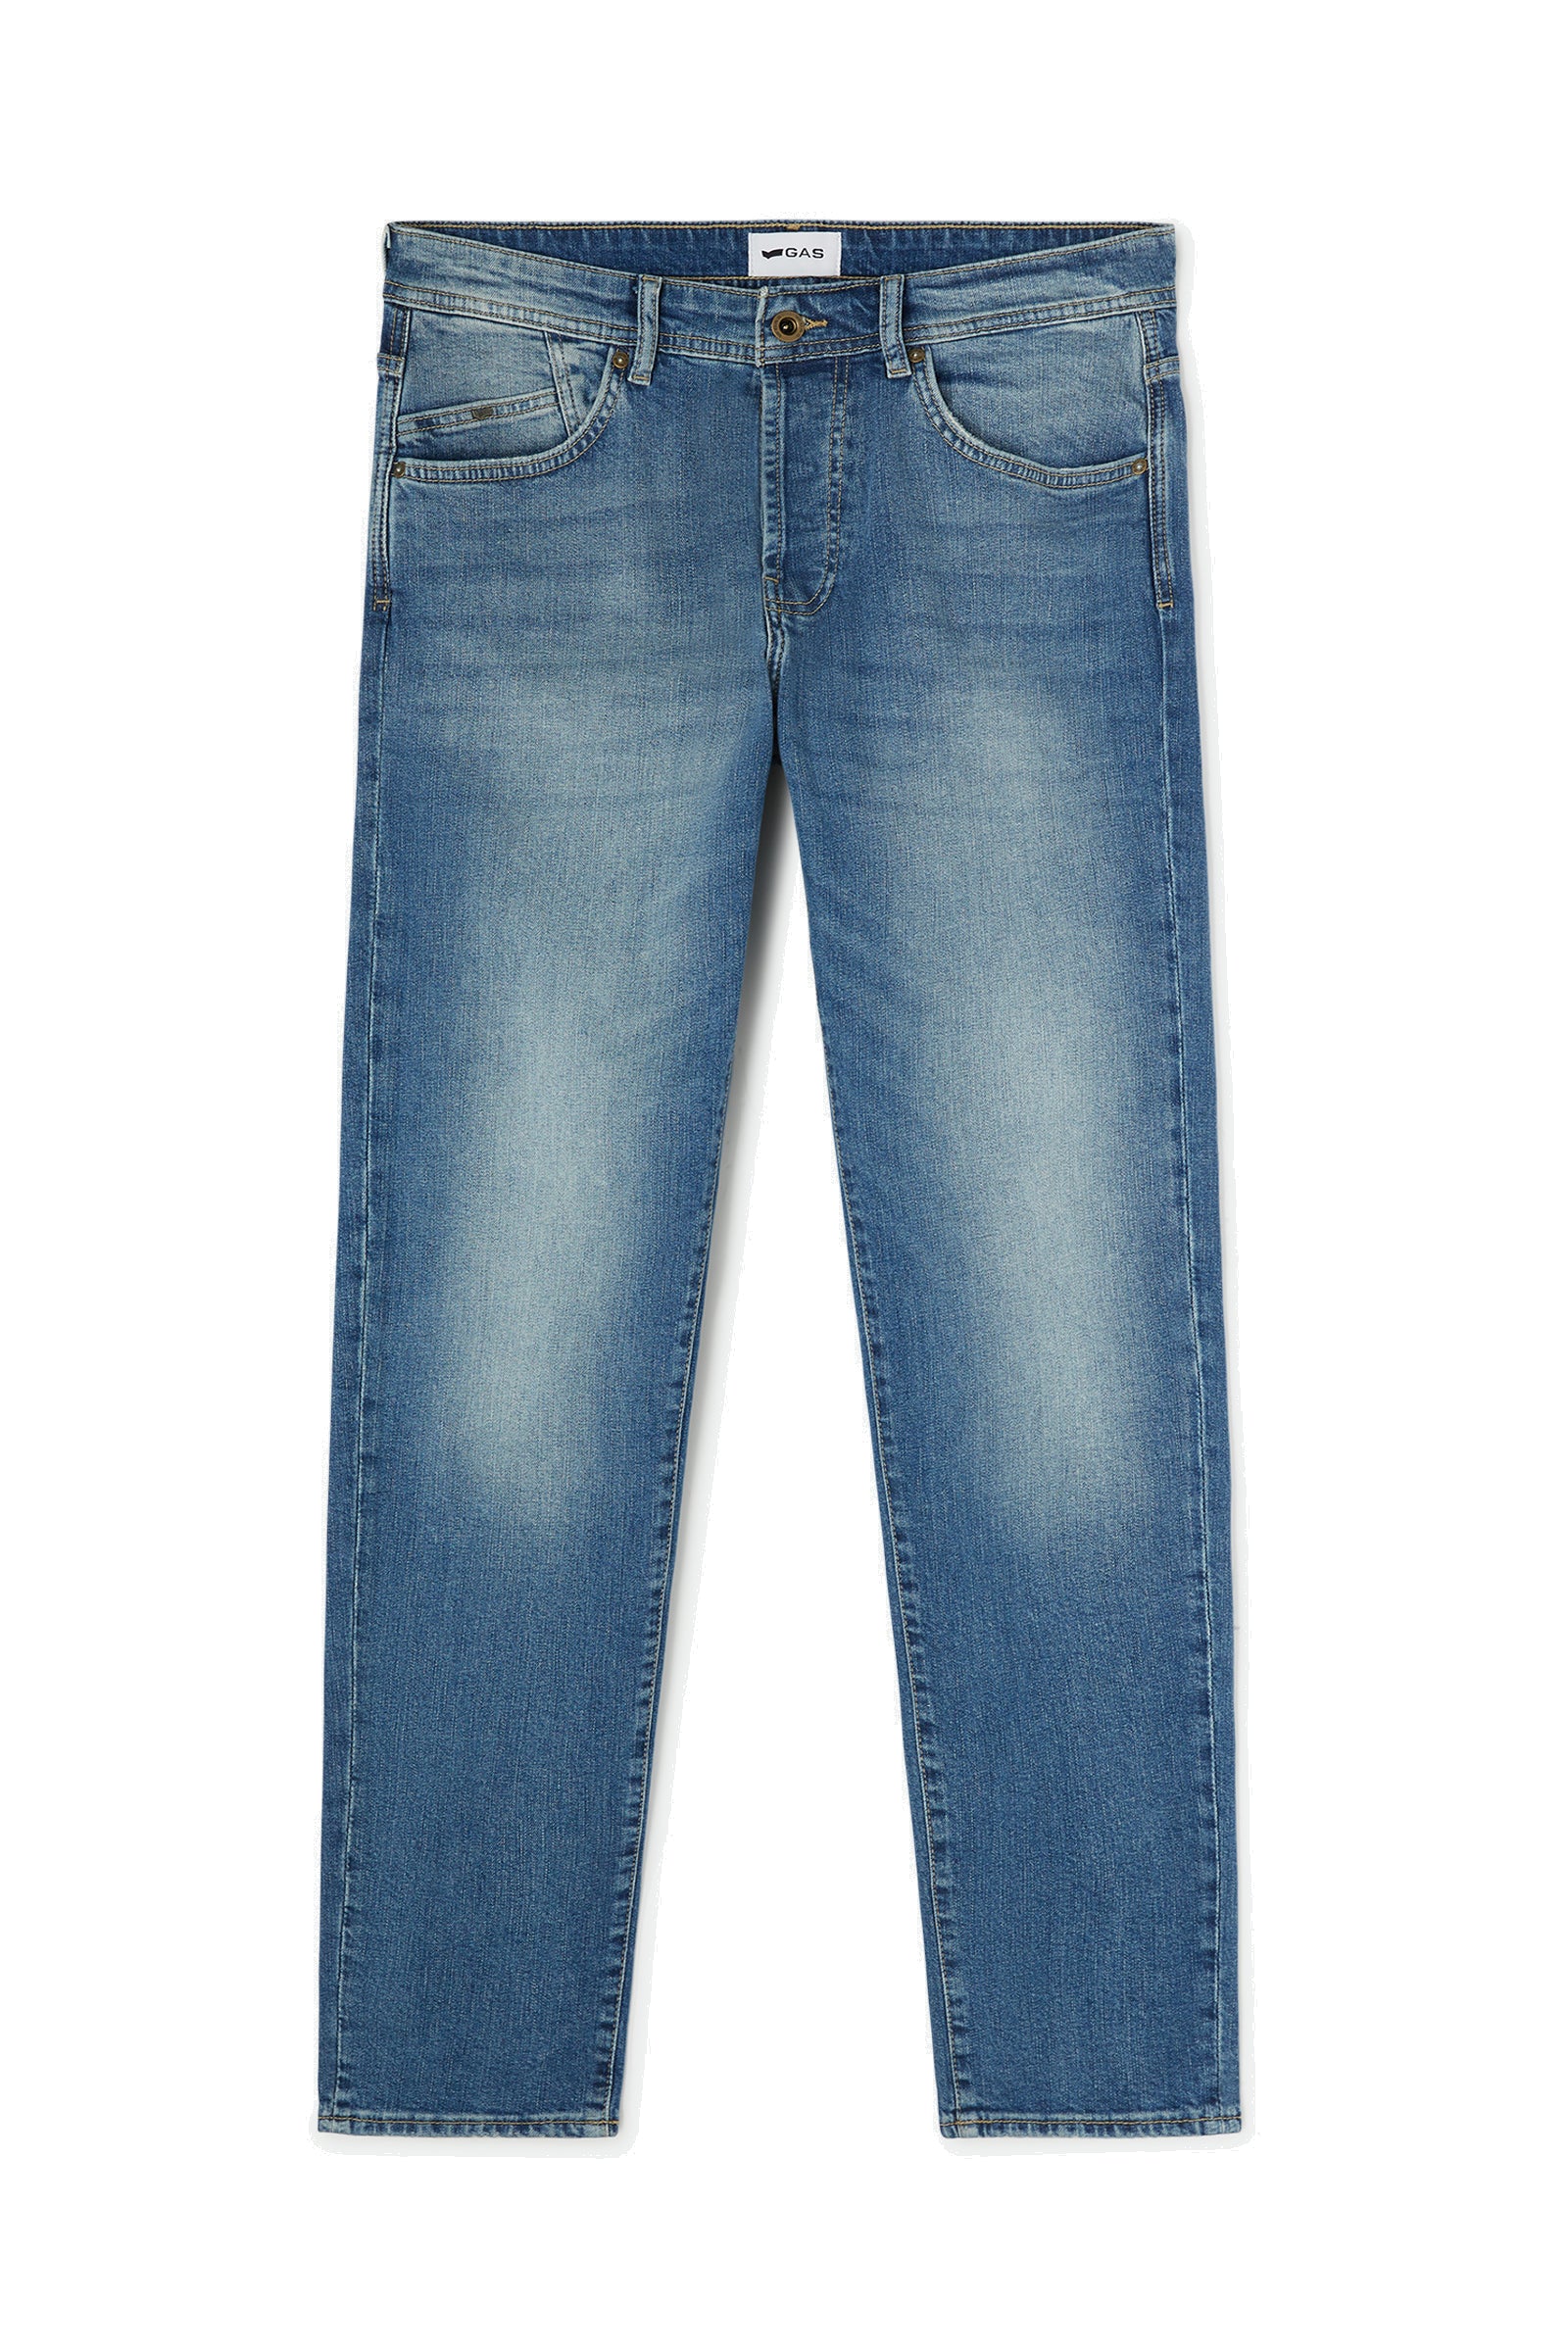 Kevin Carrot 5 Pocket in Stone Mid Light Jeans GAS   